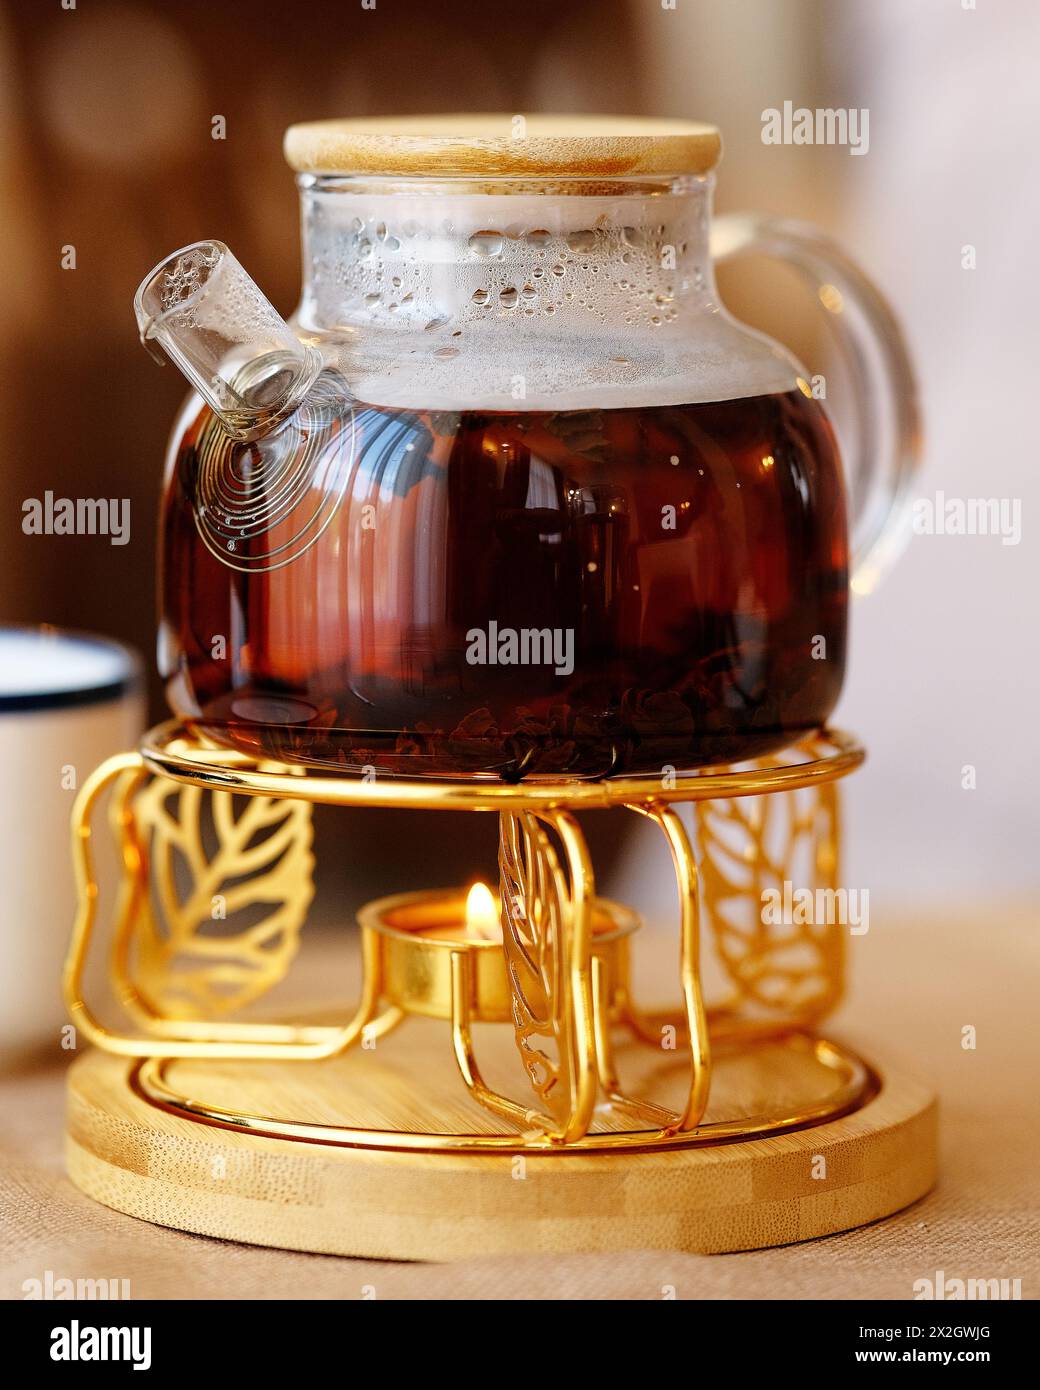 Glass teapot on a stand heated by a candle. Black tea in a glass teapot on the table. Selective focus. Stock Photo